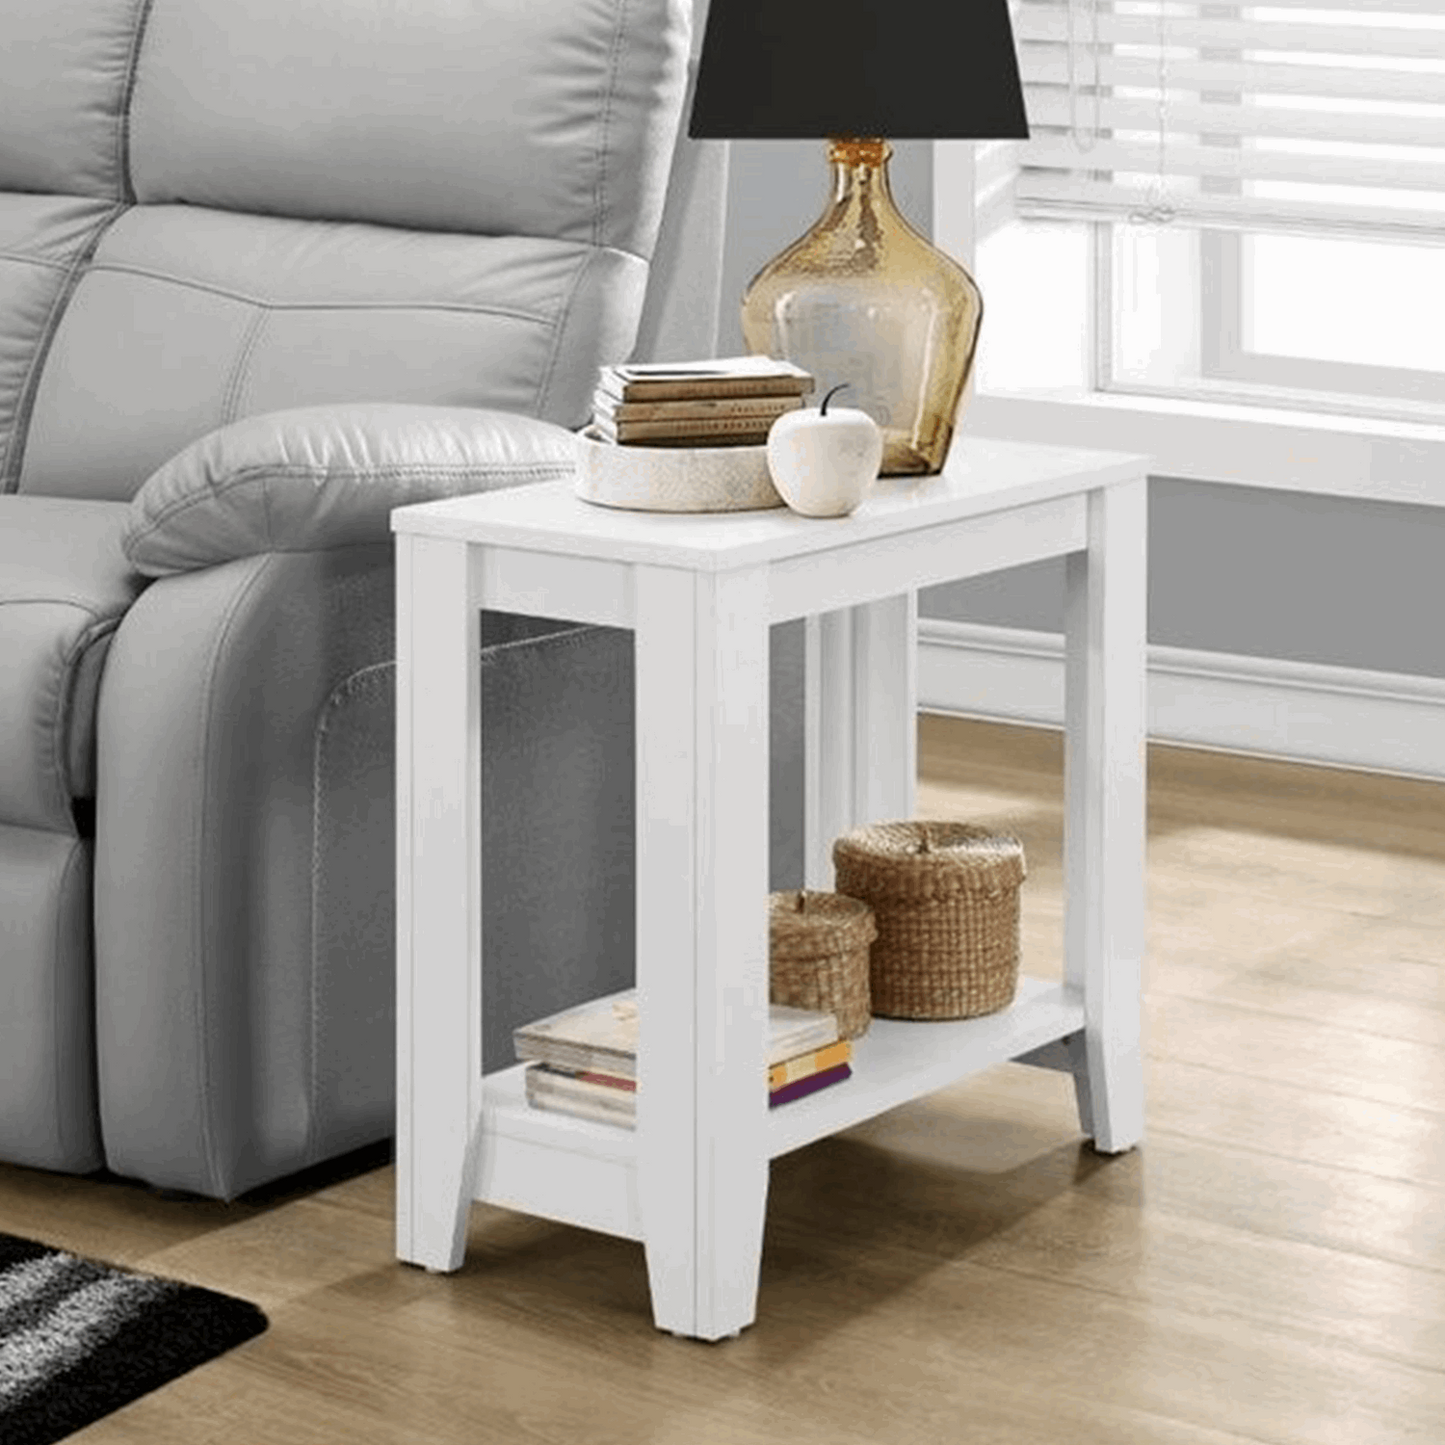 "22"" White End Table With Shelf"